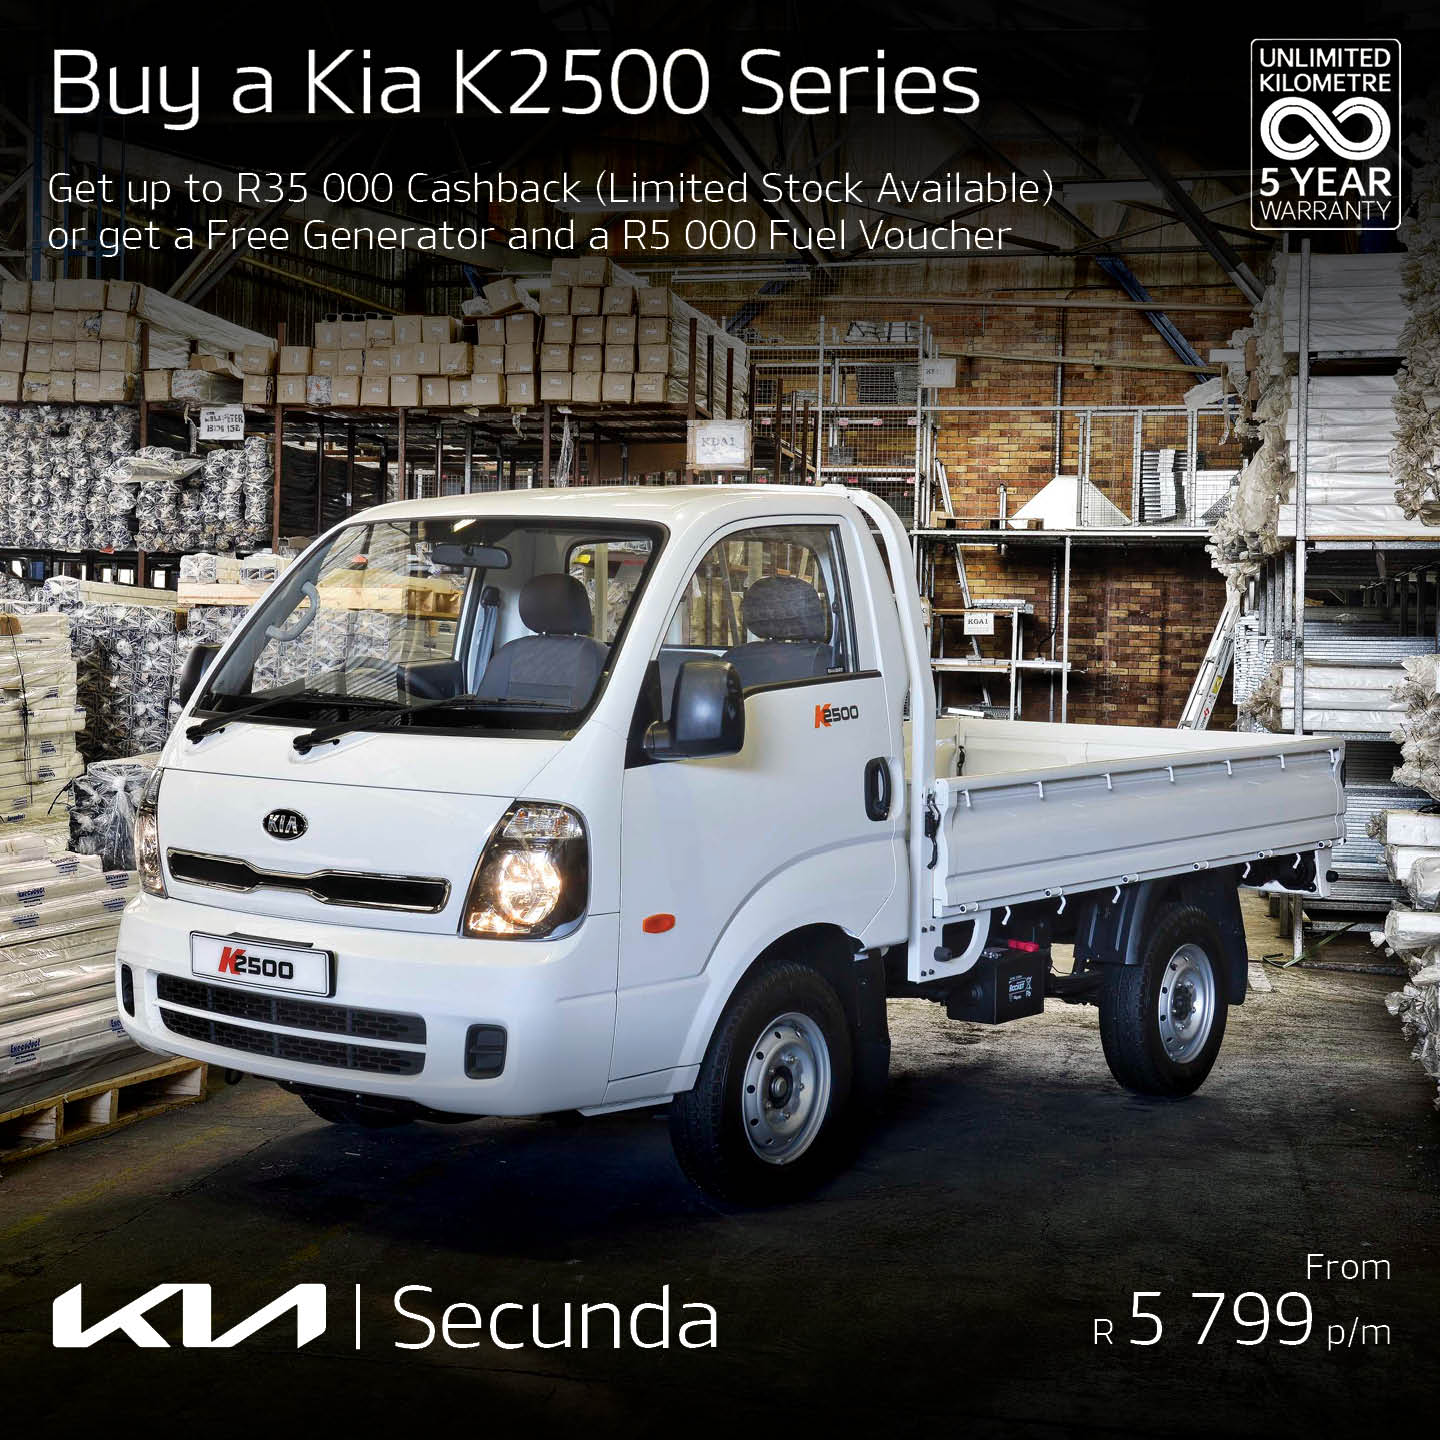 Buy a KIA K2500 Series image from 